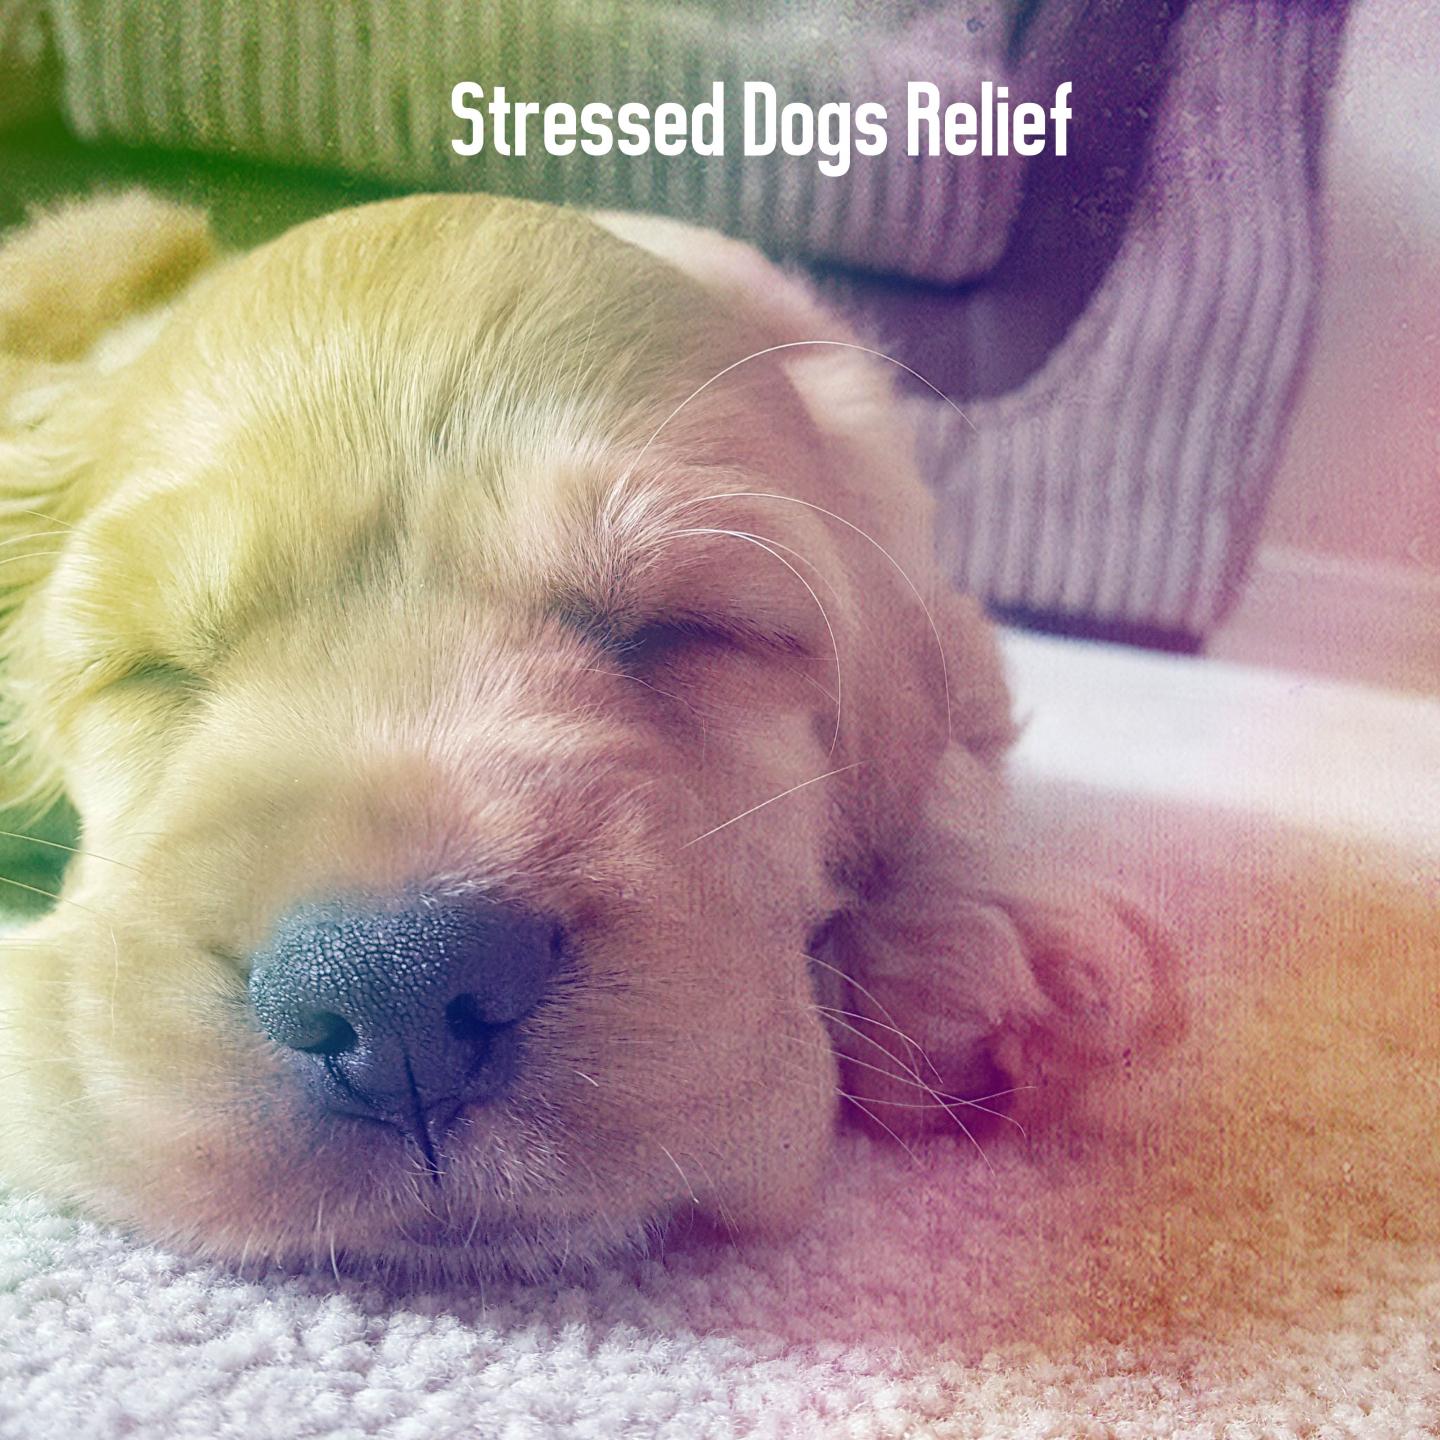 Stressed Dogs Relief